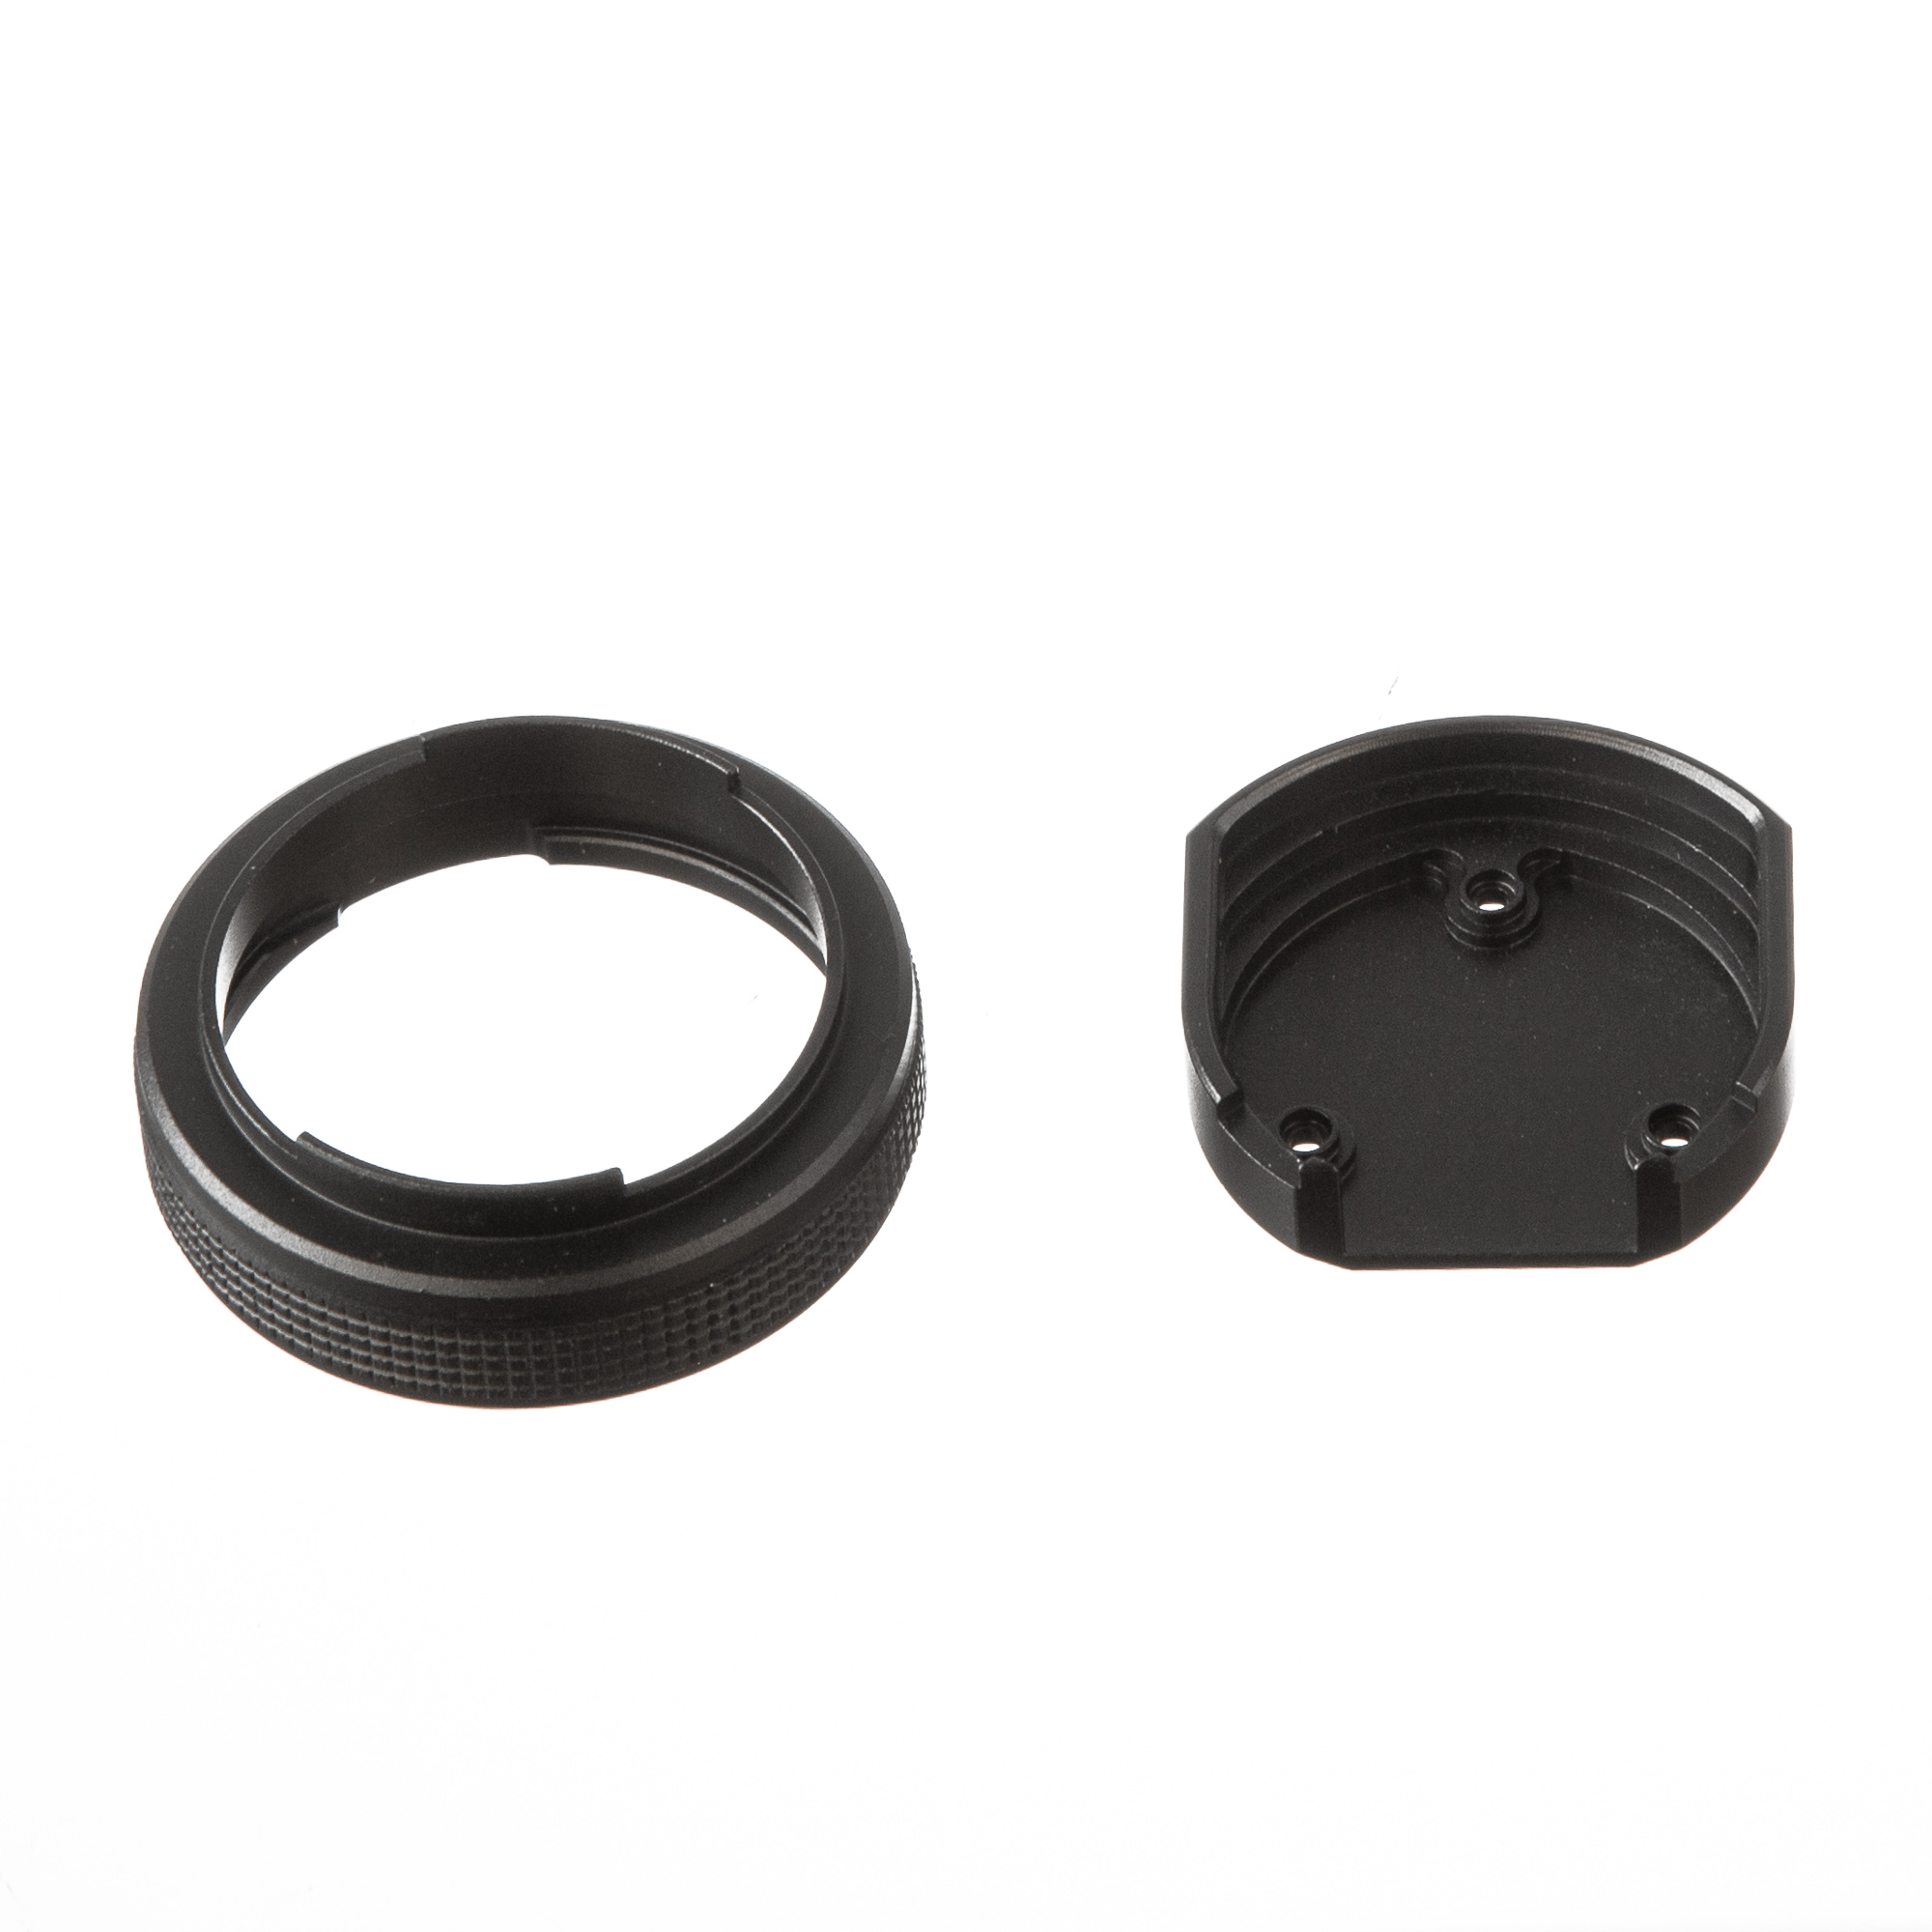 Ultimaxx X5 GIMBAL ADAPTER FOR